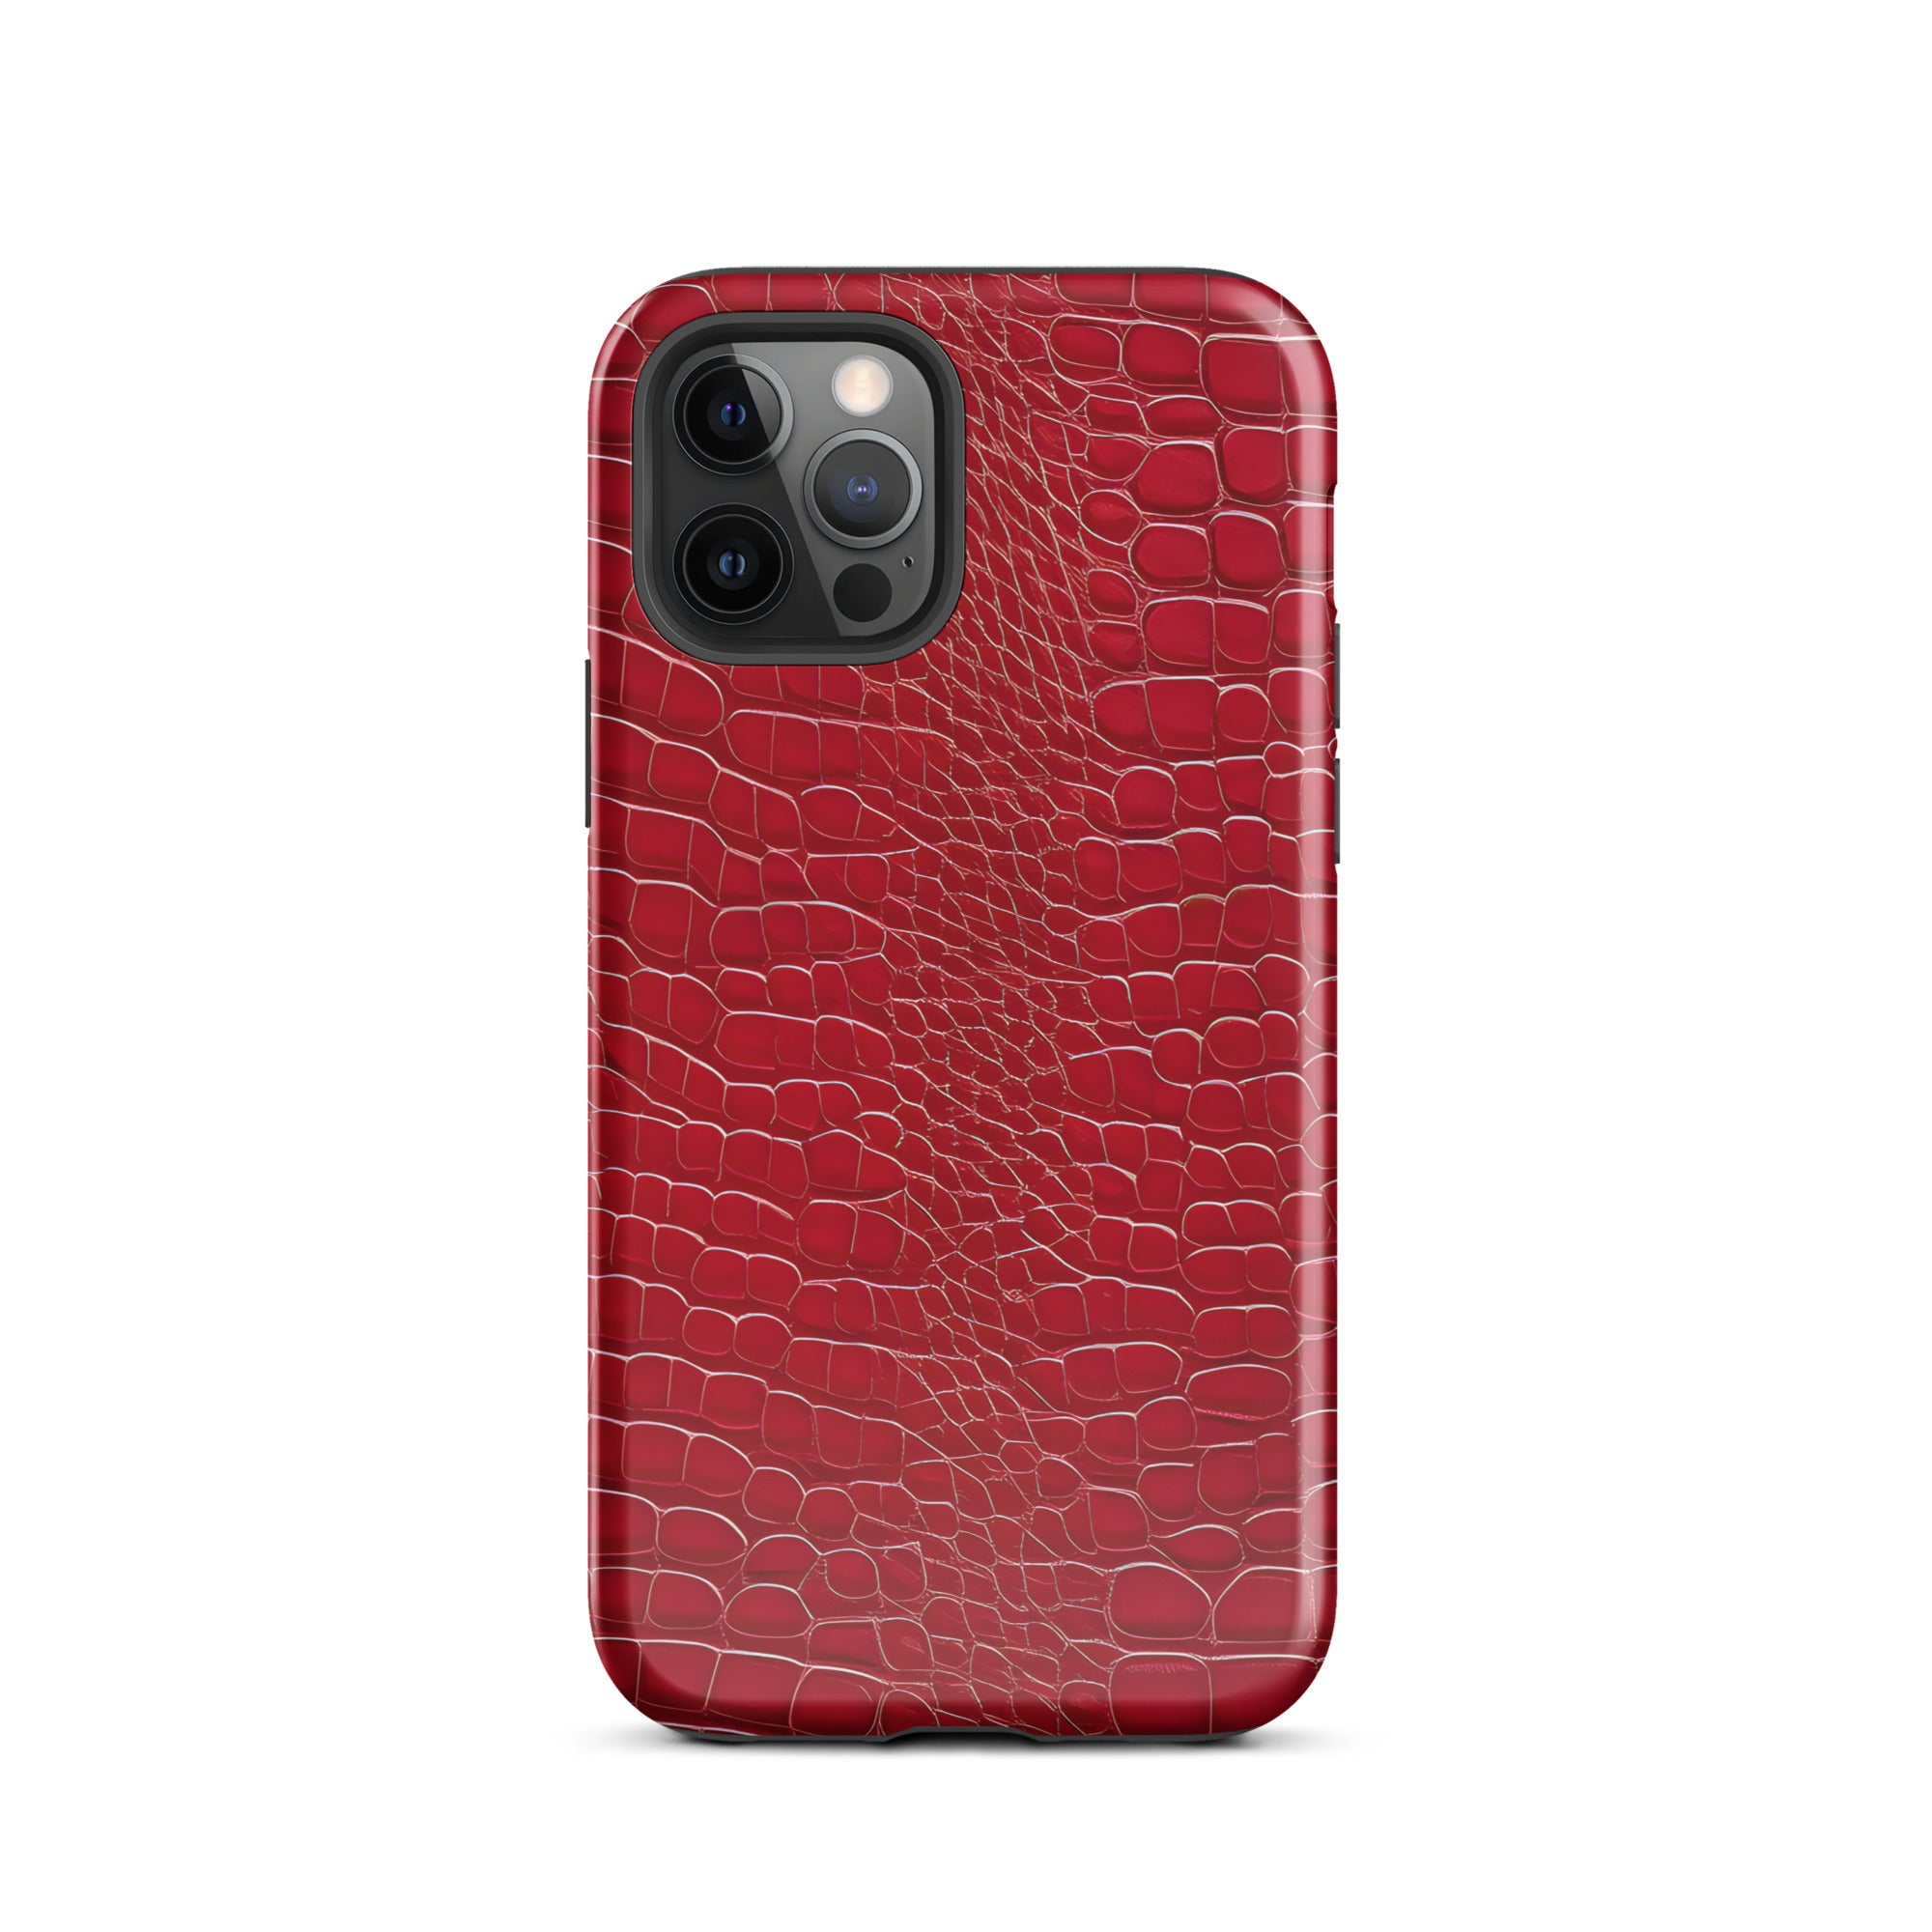 tough-case-for-iphone-glossy-iphone-12-pro-front-656383d5b5781.jpg